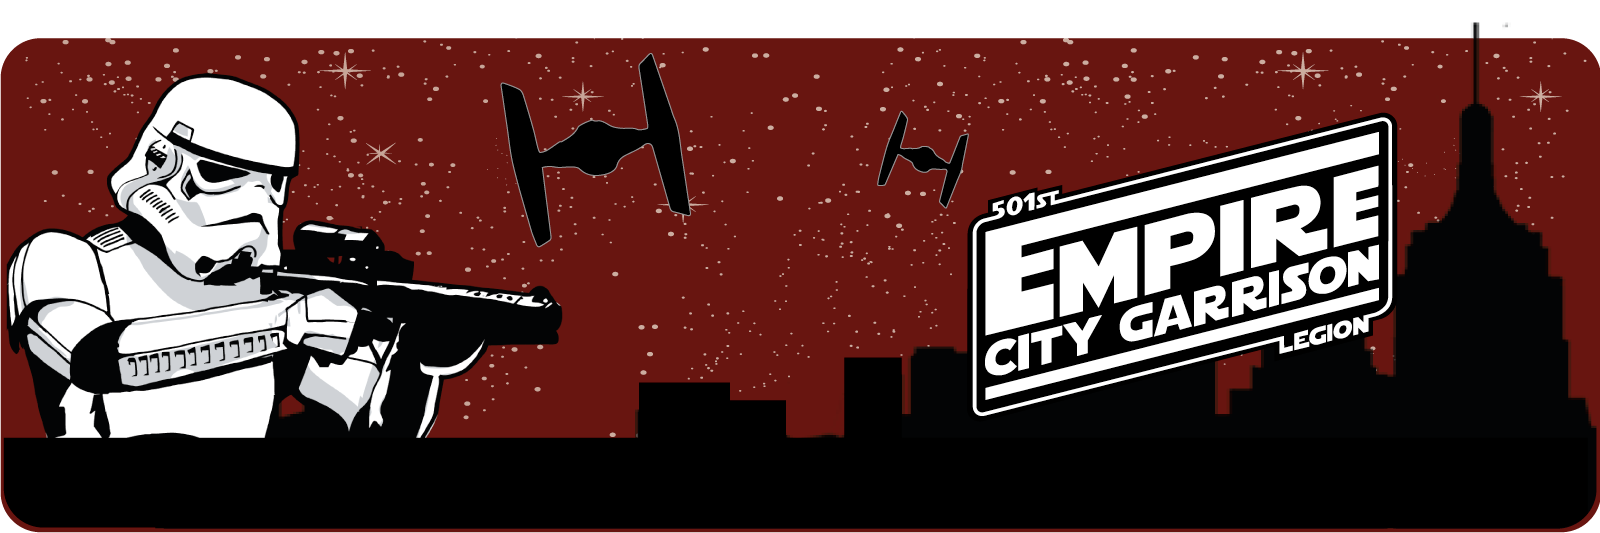 Empire City clipart #1, Download drawings